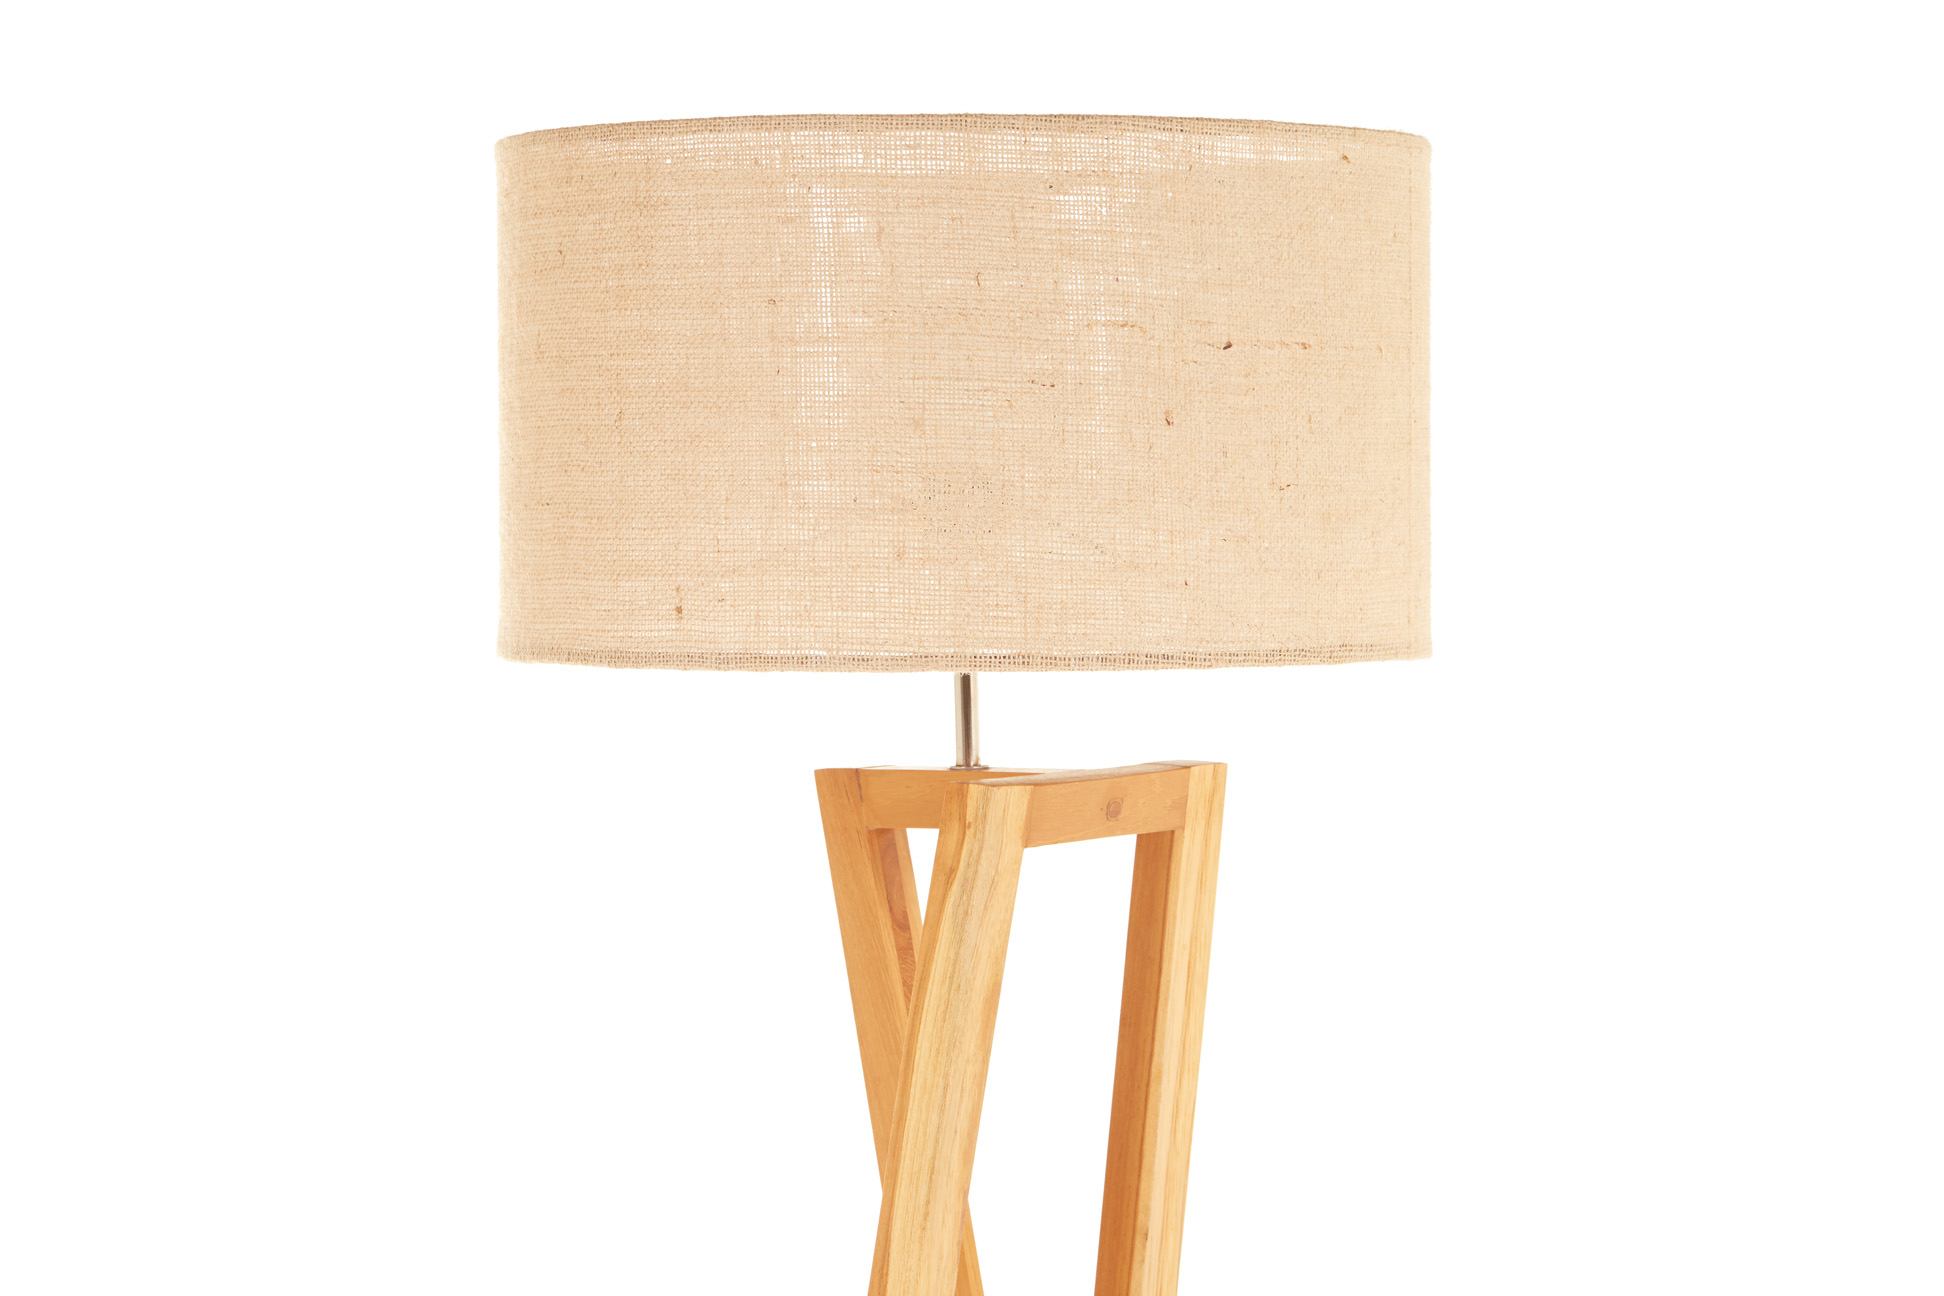 A CONTEMPORARY FLOOR LAMP - Image 2 of 2